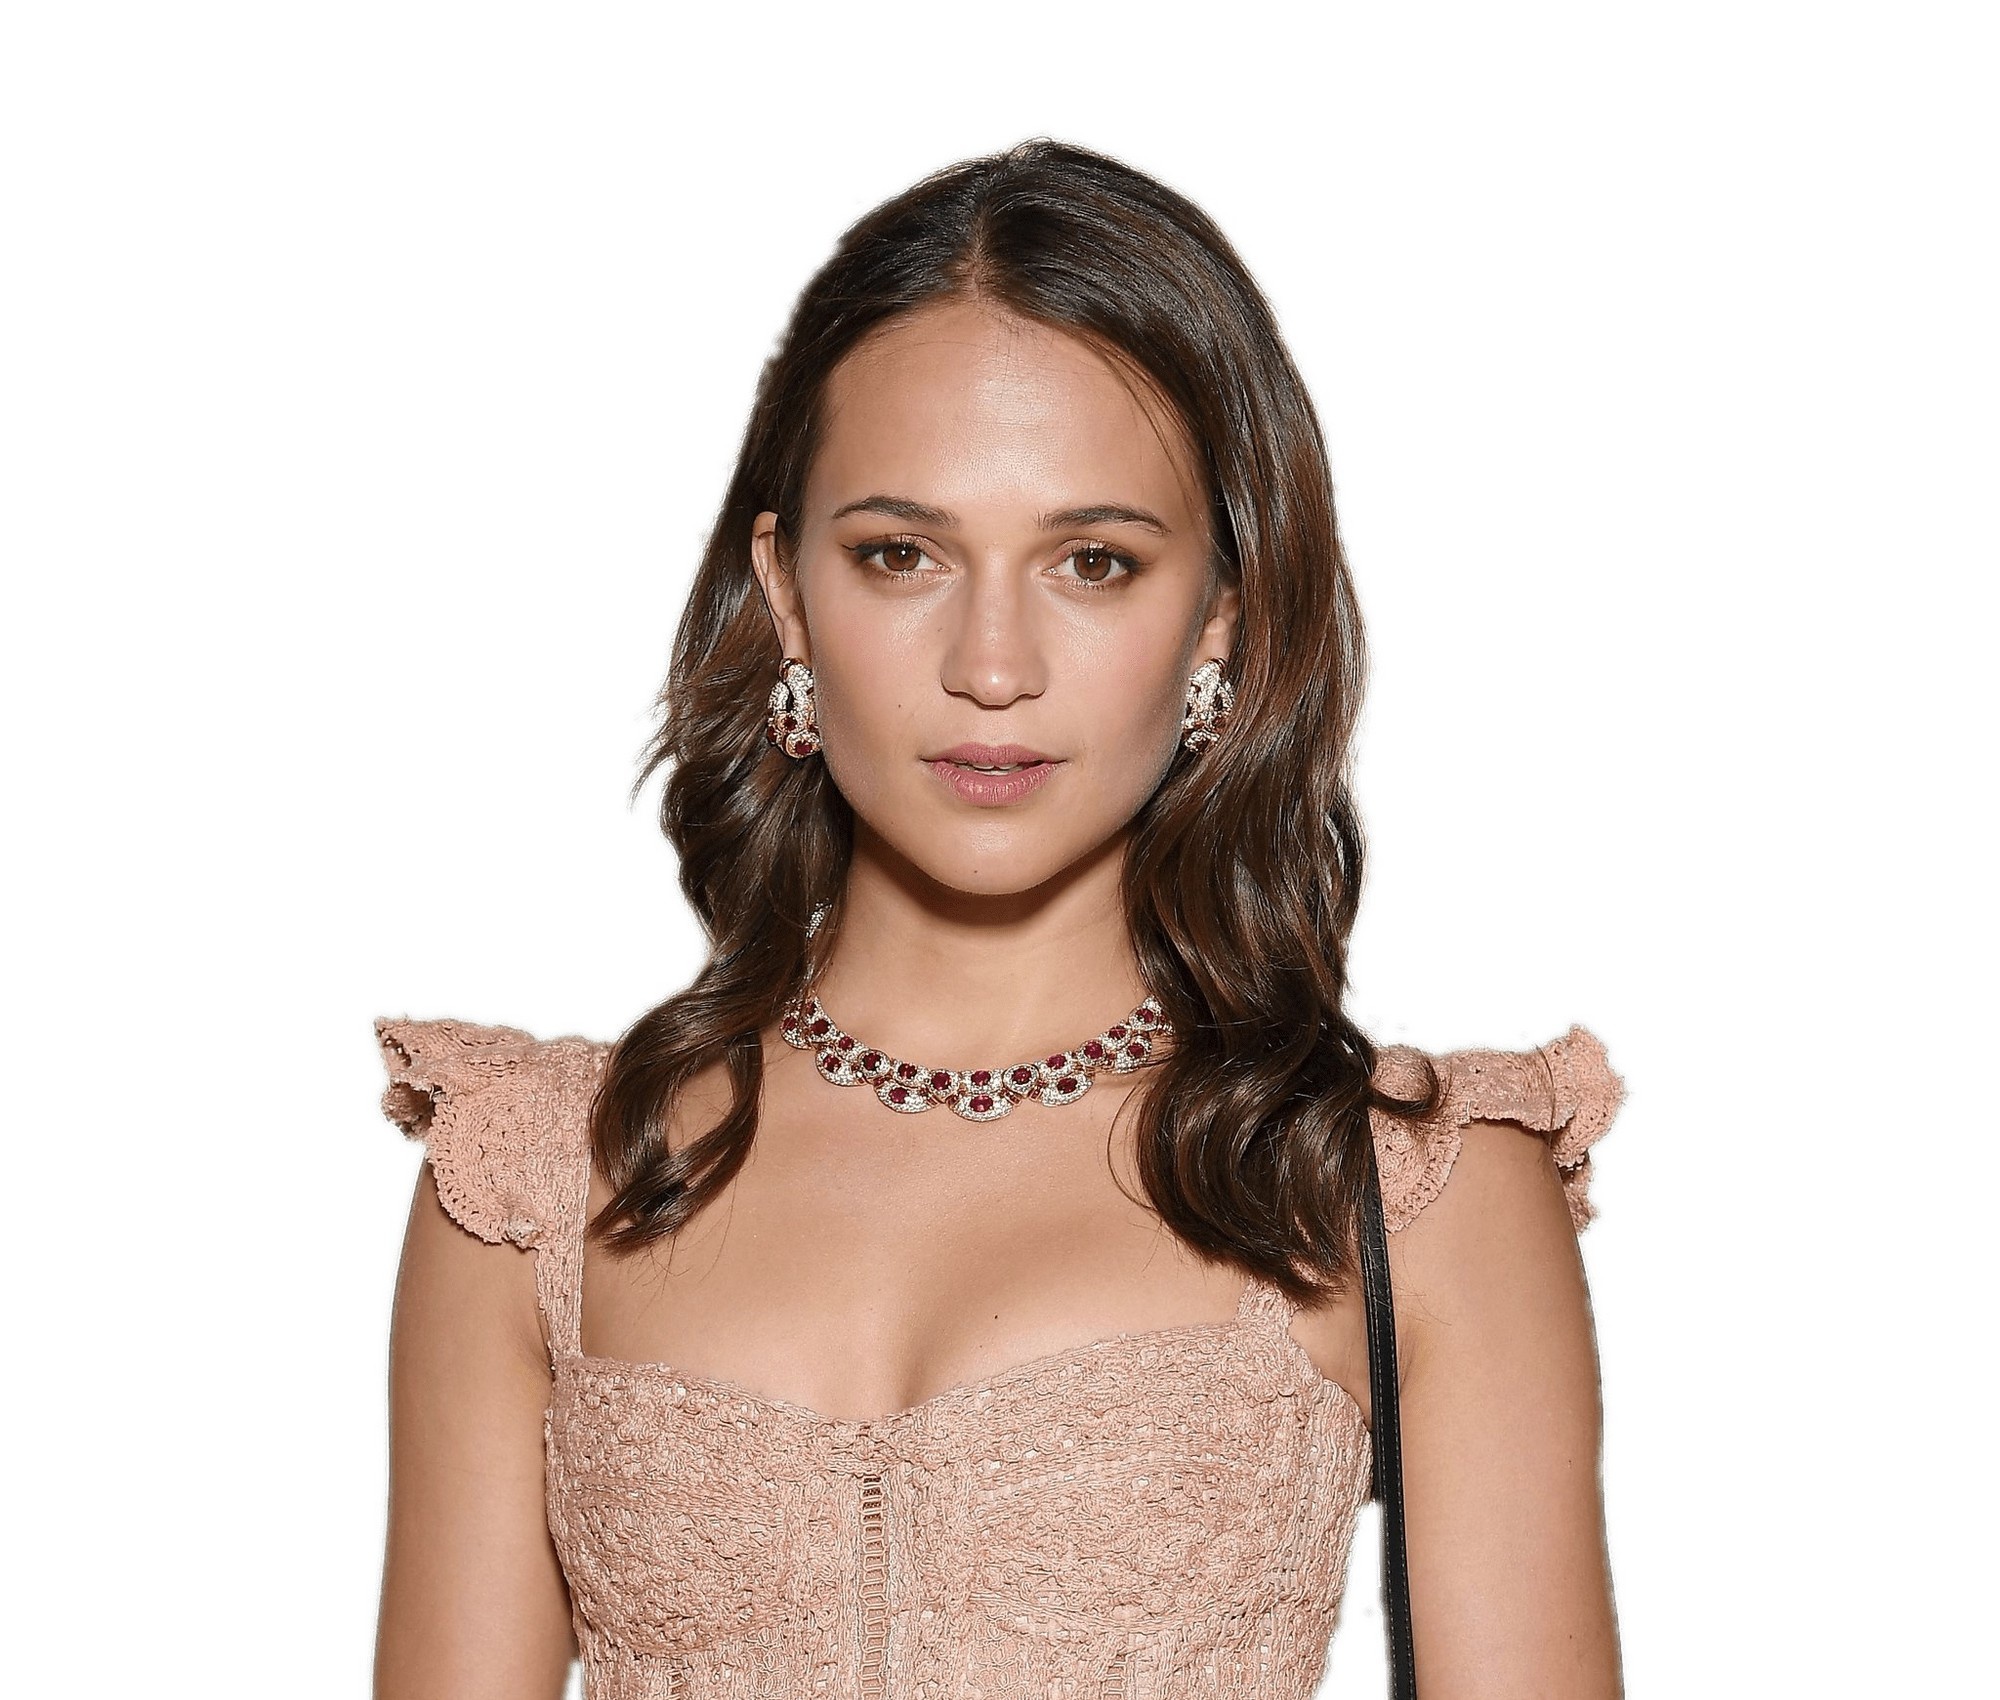 Actress Alicia Vikander Brown Eyes Brunette Earrings Necklace Swedish 2000x1700